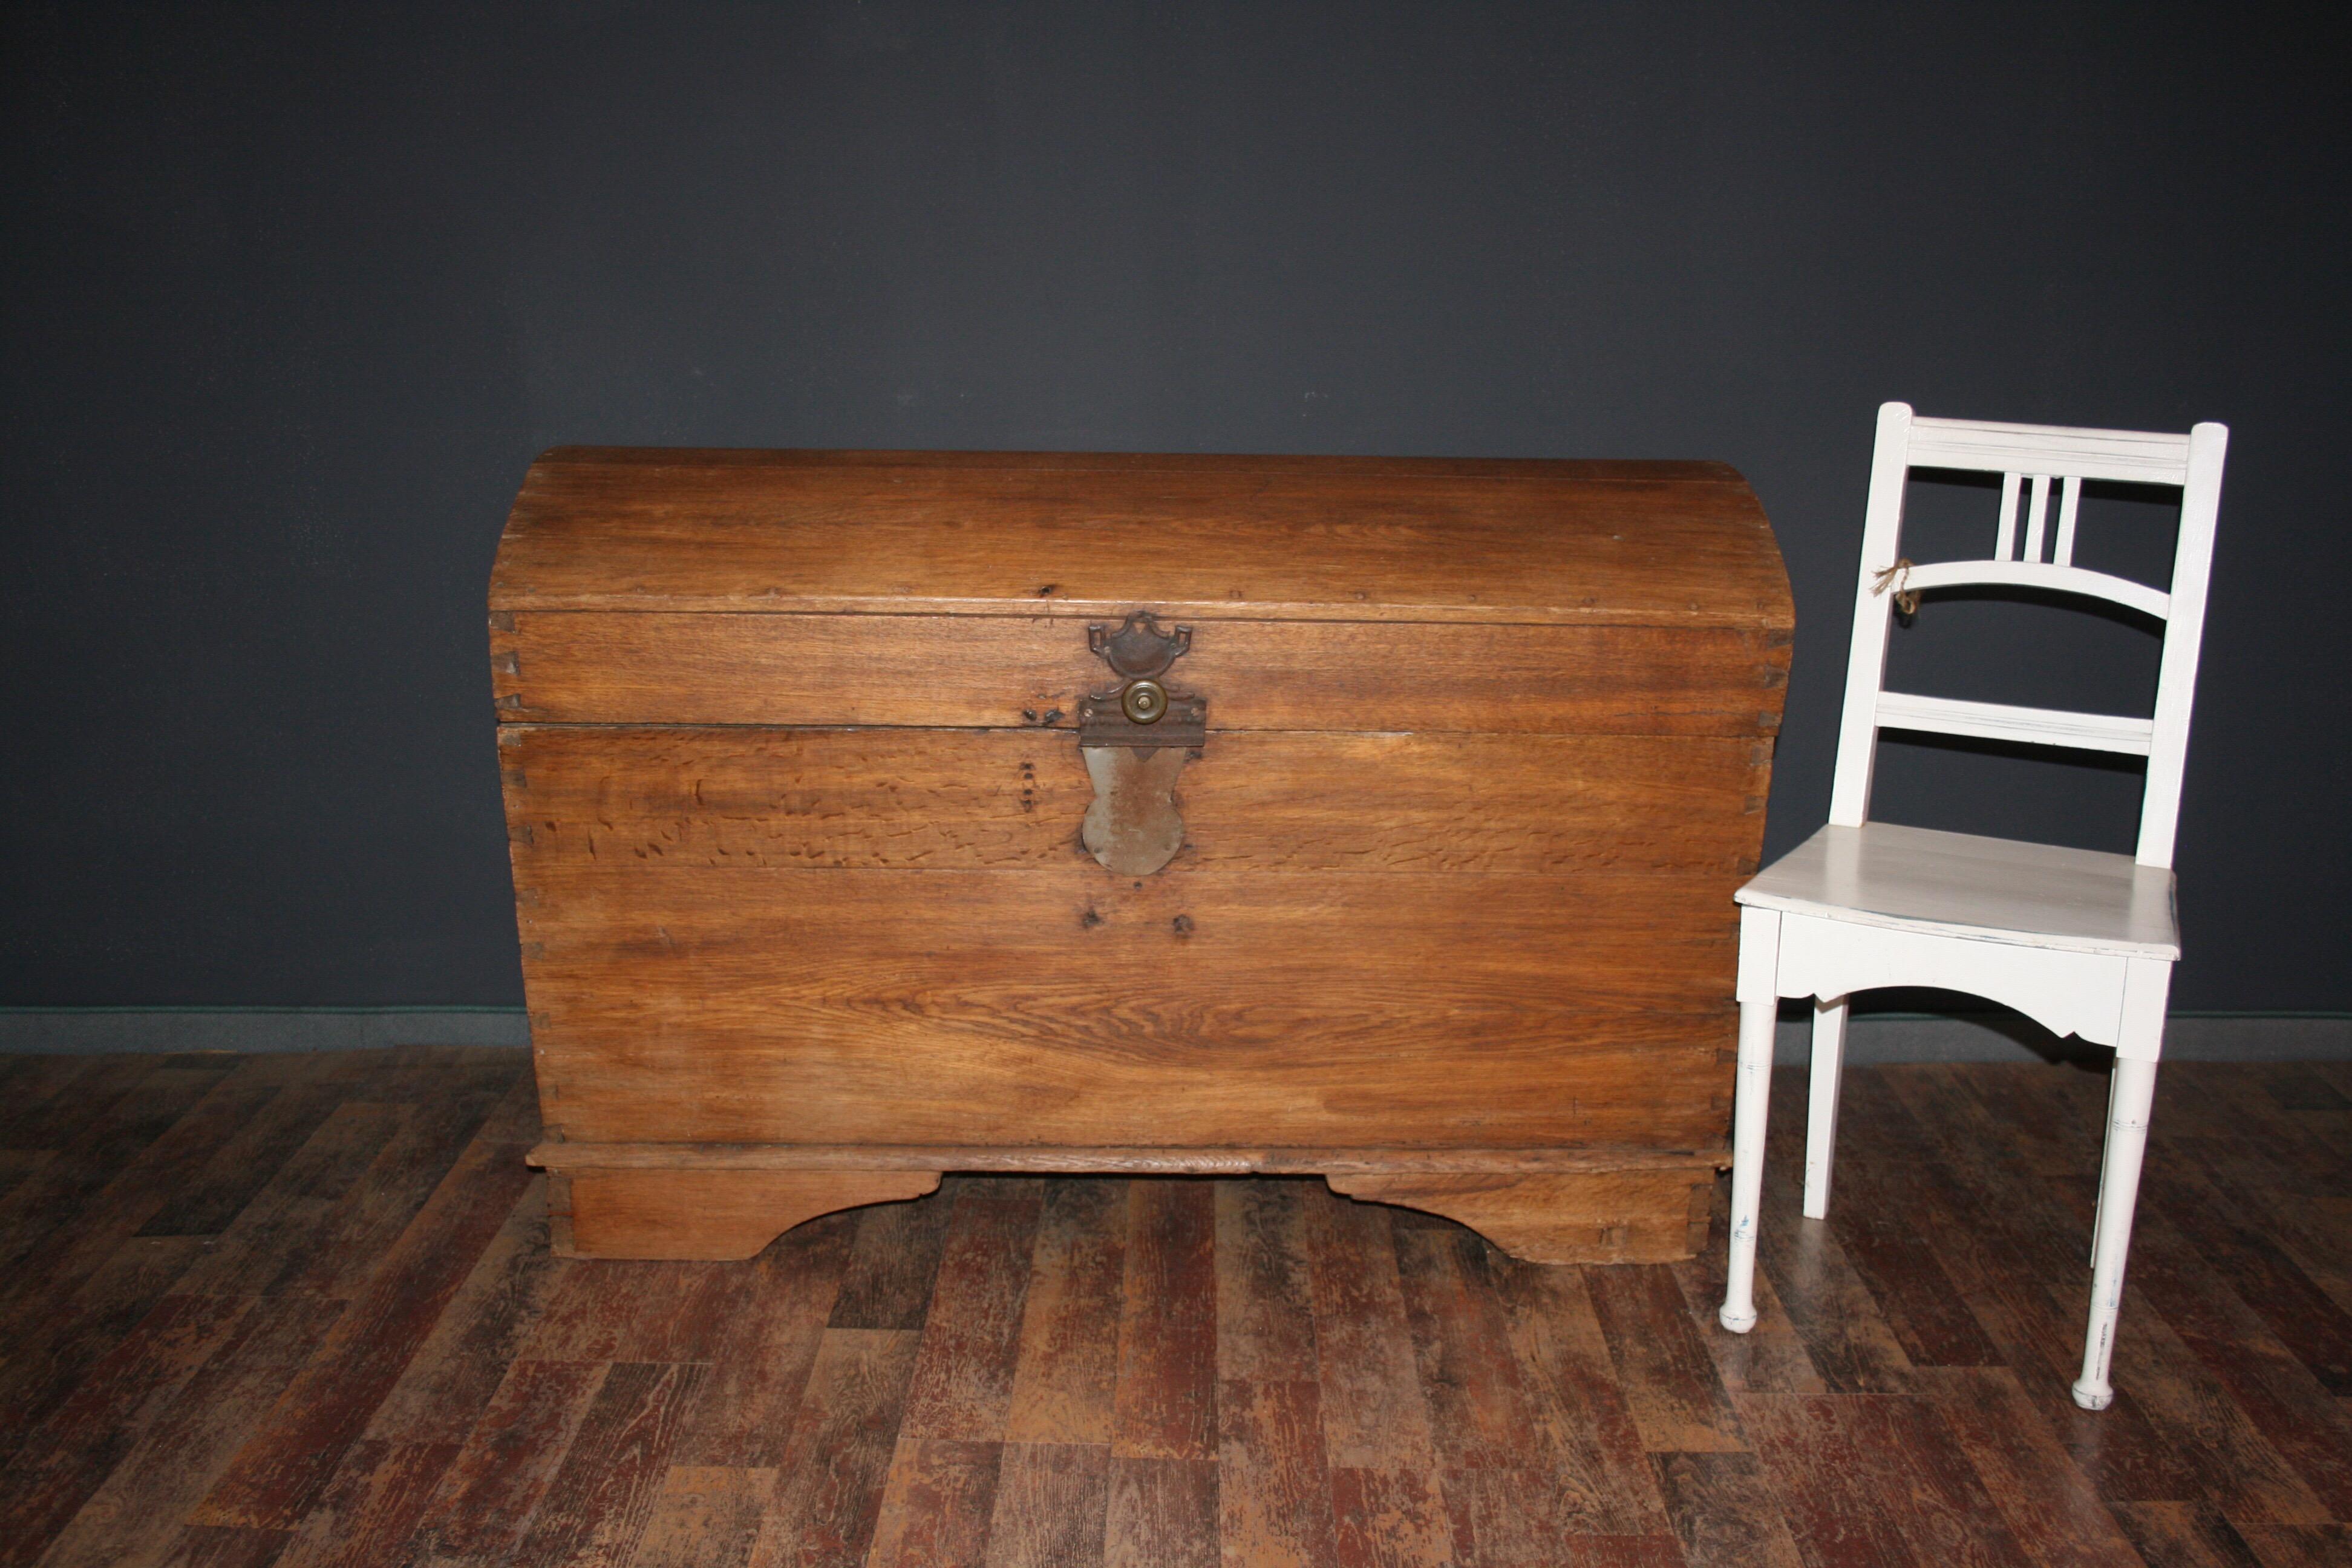 Original antique round lid chest of solid oak, circa 18th century. Inside with a shelf, which of course can take out. Wrought iron hardware and handles.

Dimensions: 84 cm high, 125 cm wide, 61 cm deep.